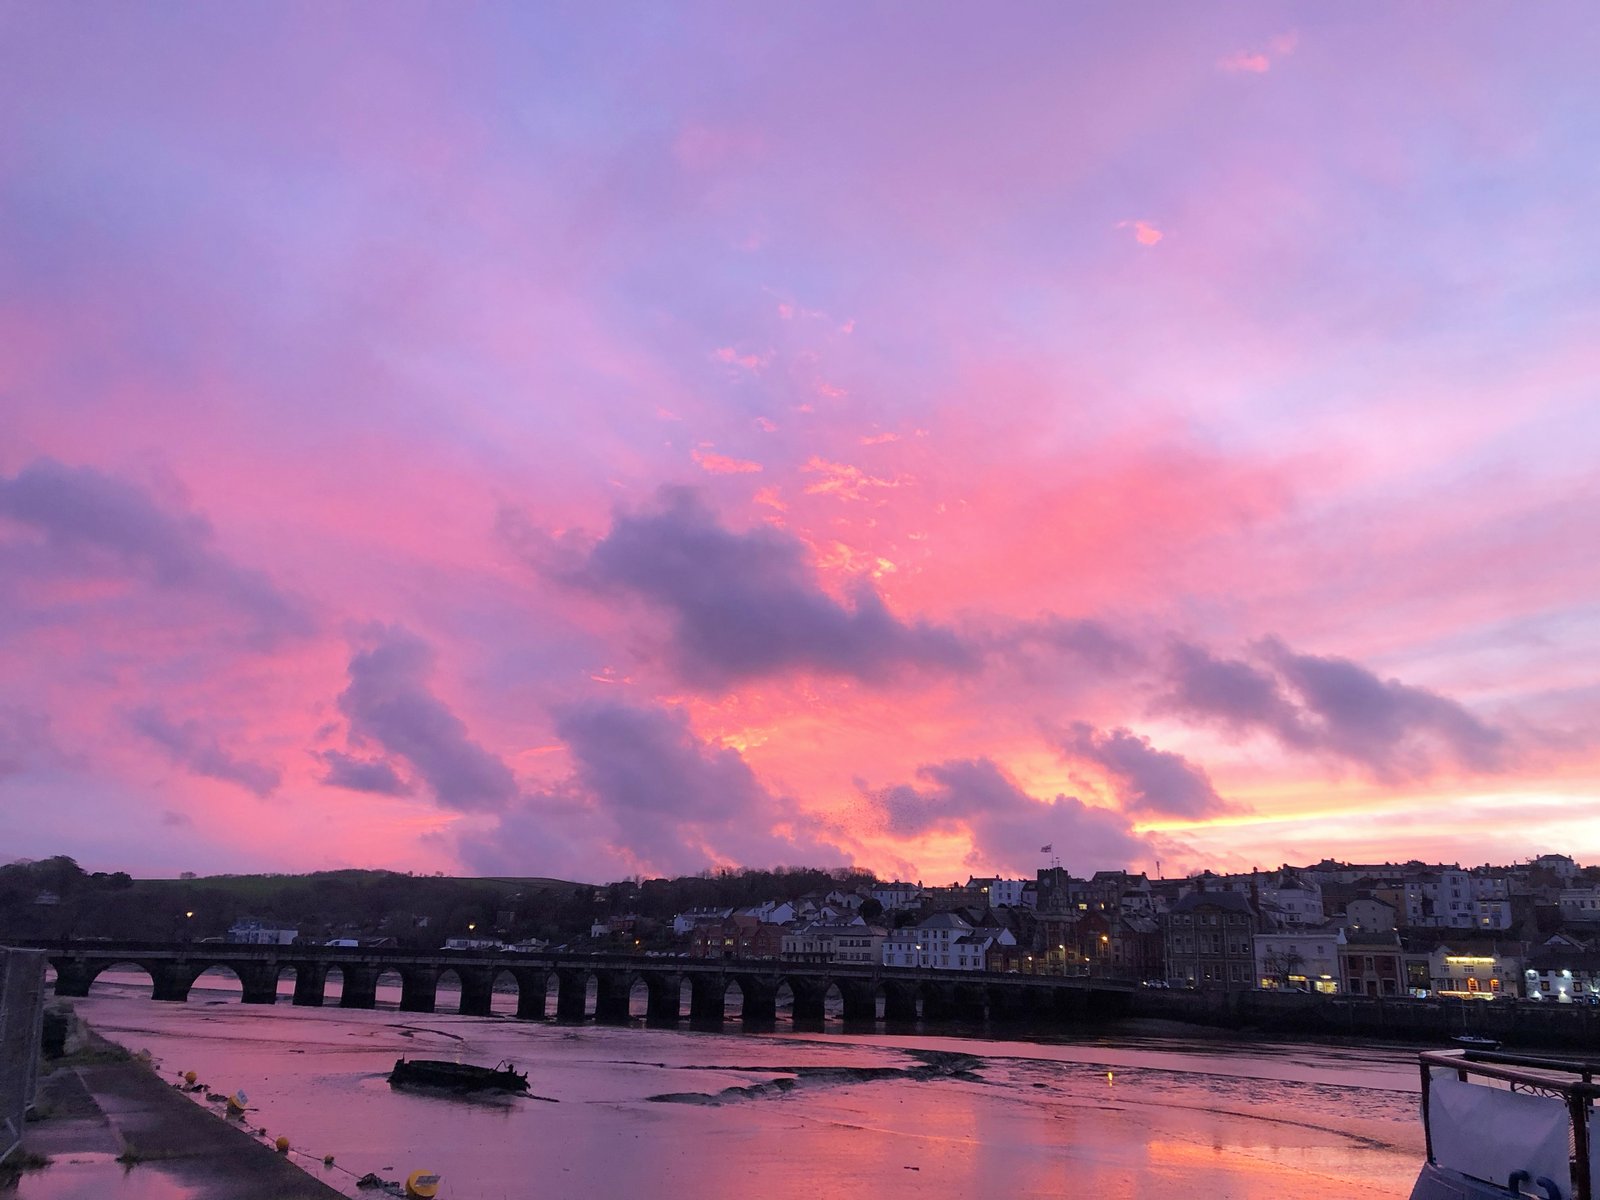 Pictures from around Bideford